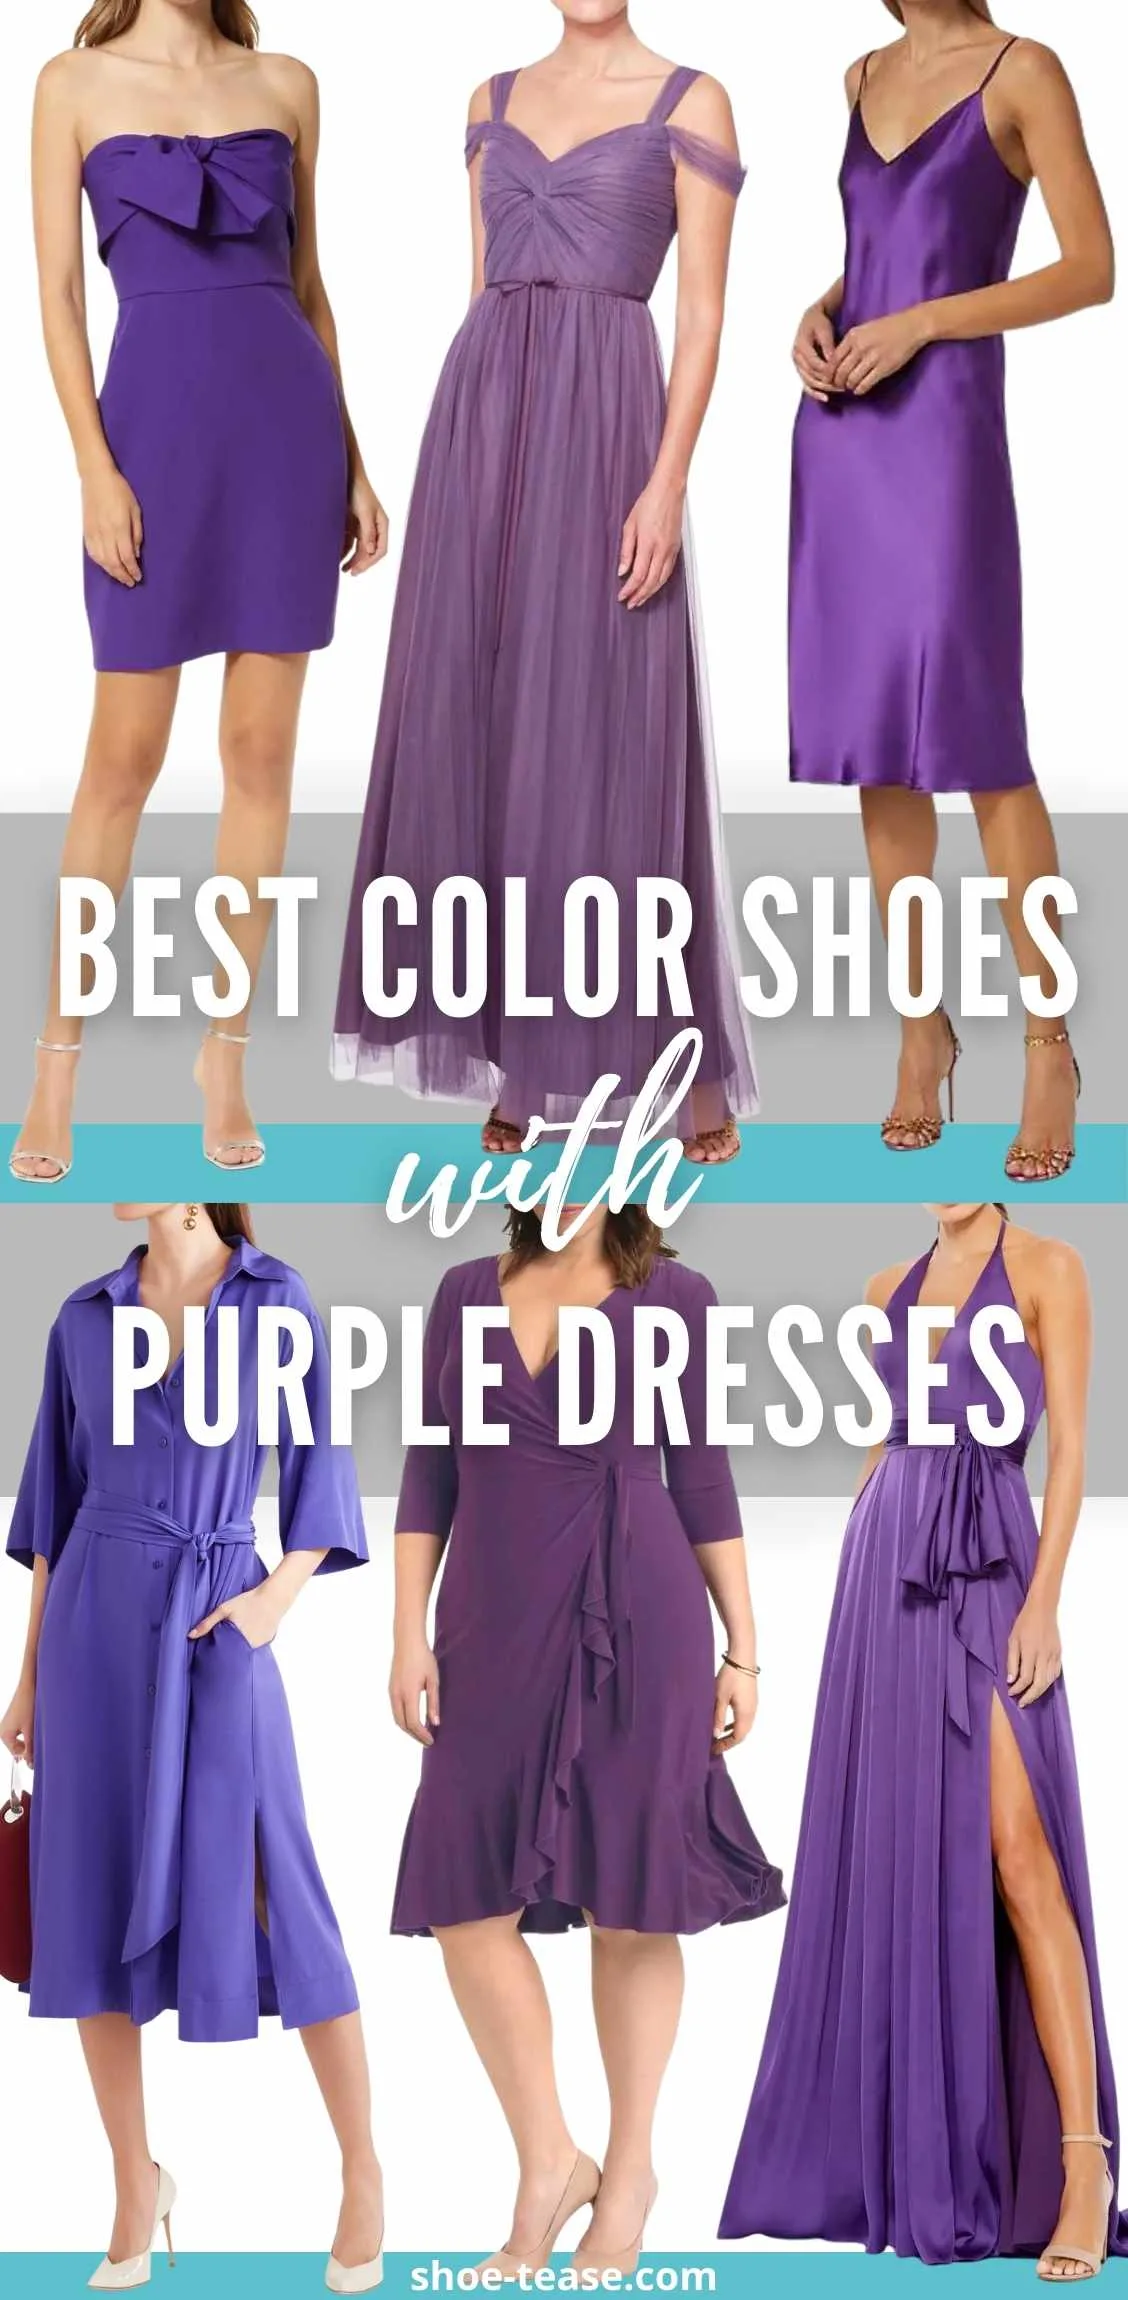 cheekbone Brick brittle 8 Best Color Shoes to Wear with a Purple Dress Outfit